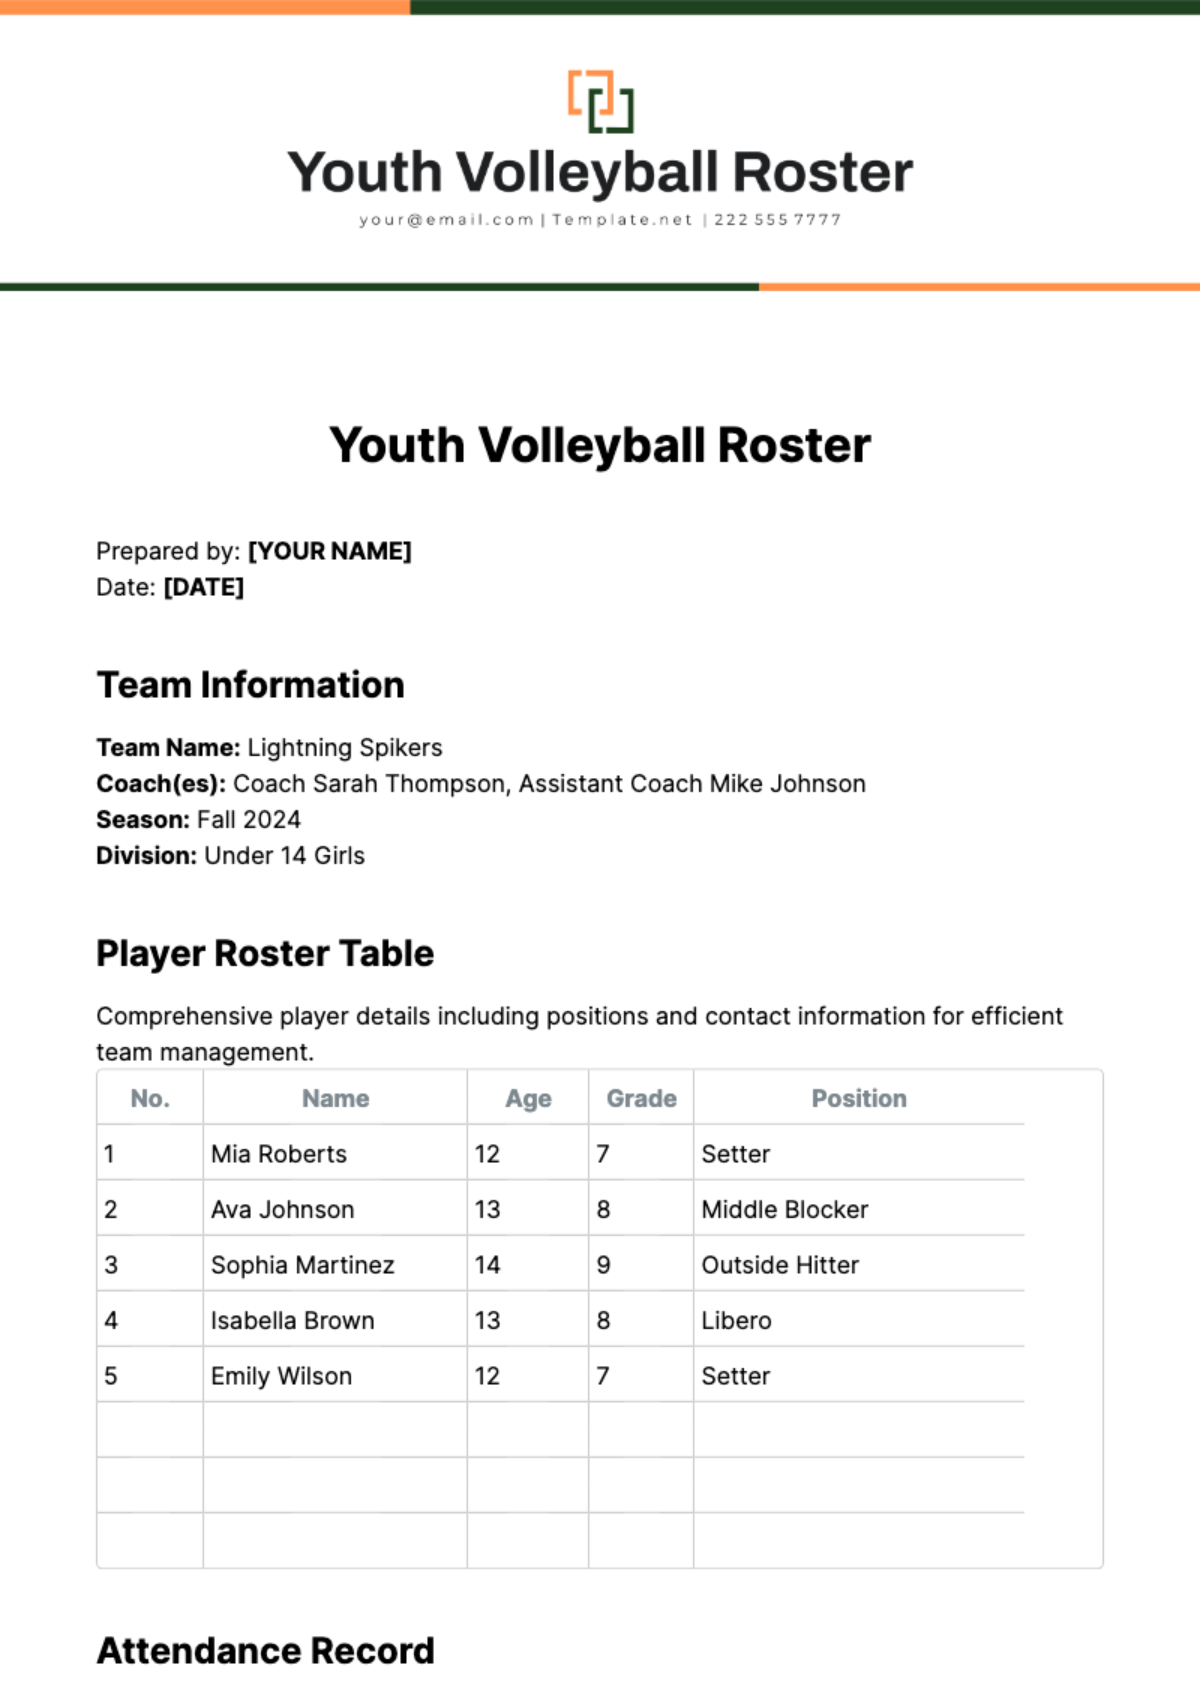 Youth Volleyball Roster Template